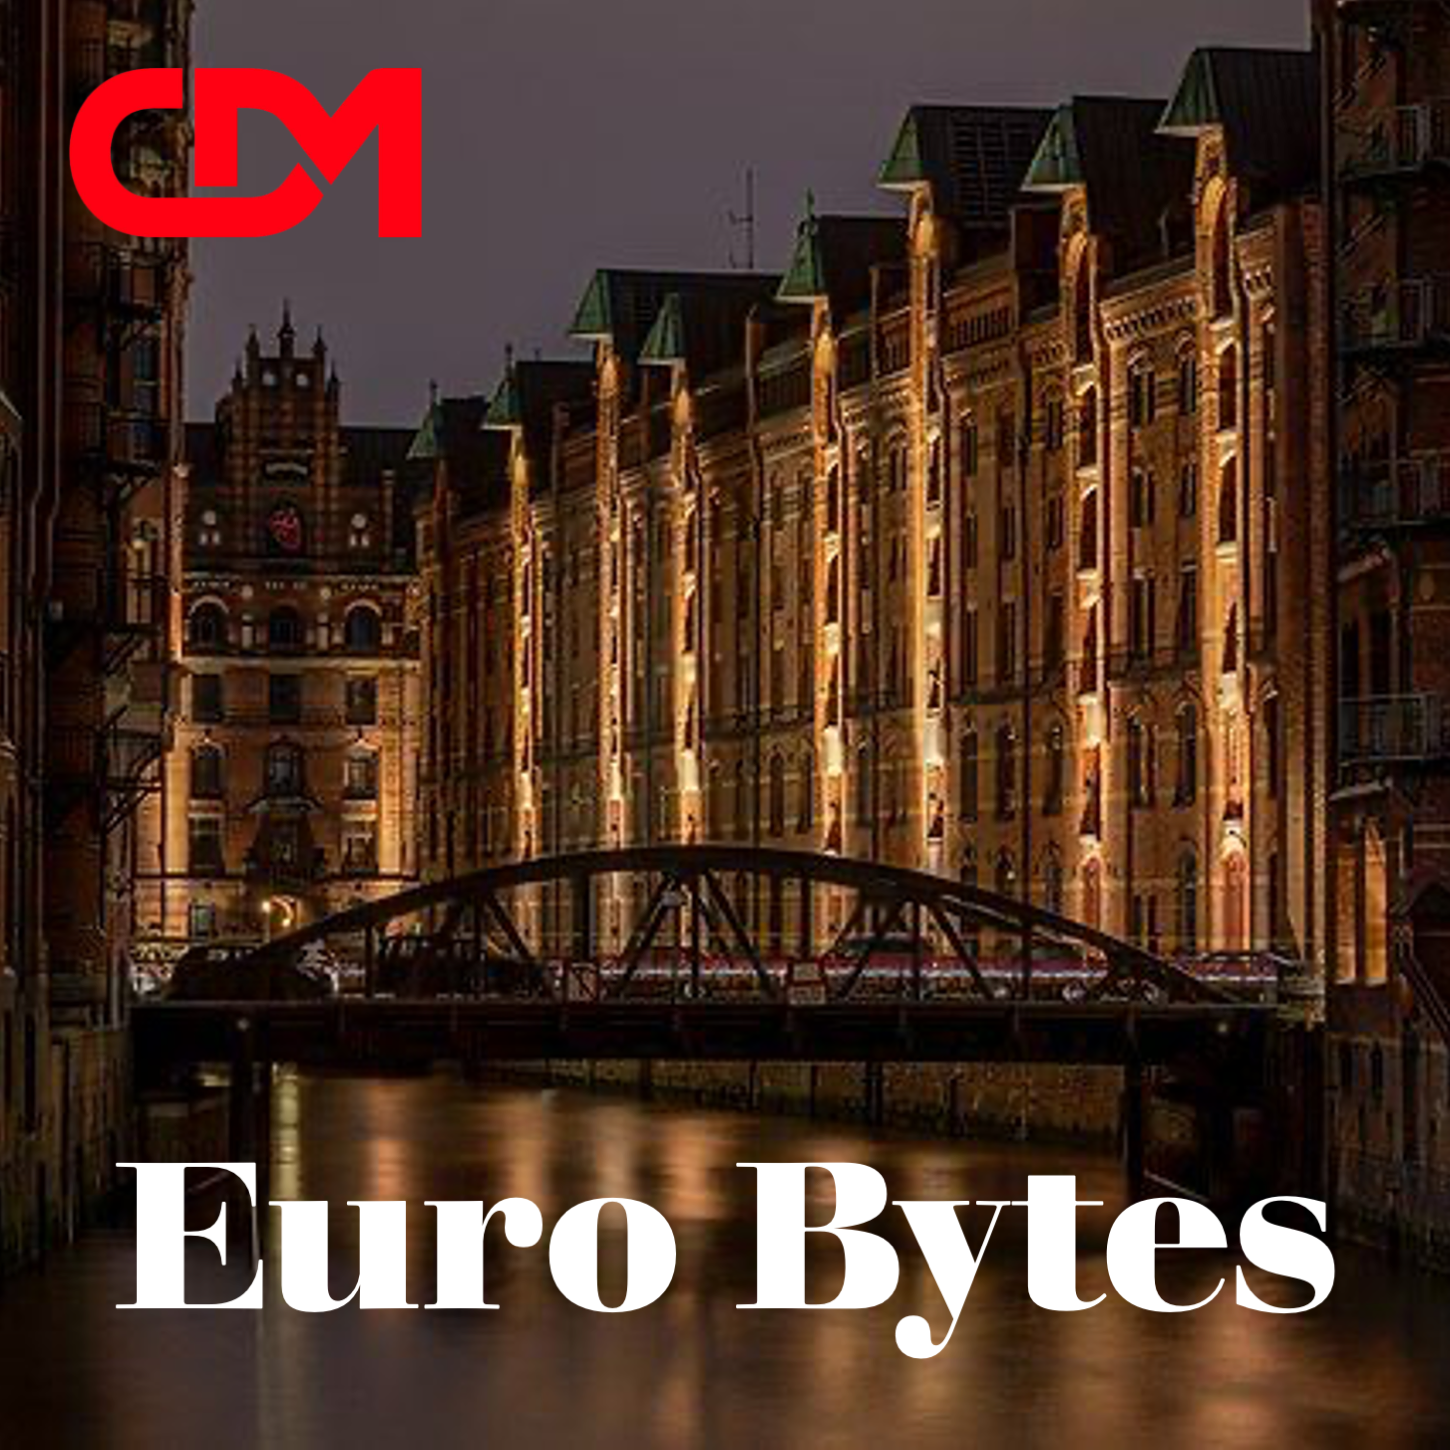 Euro Bytes - Why Does Germany Accept Its Demise? 4/7/24